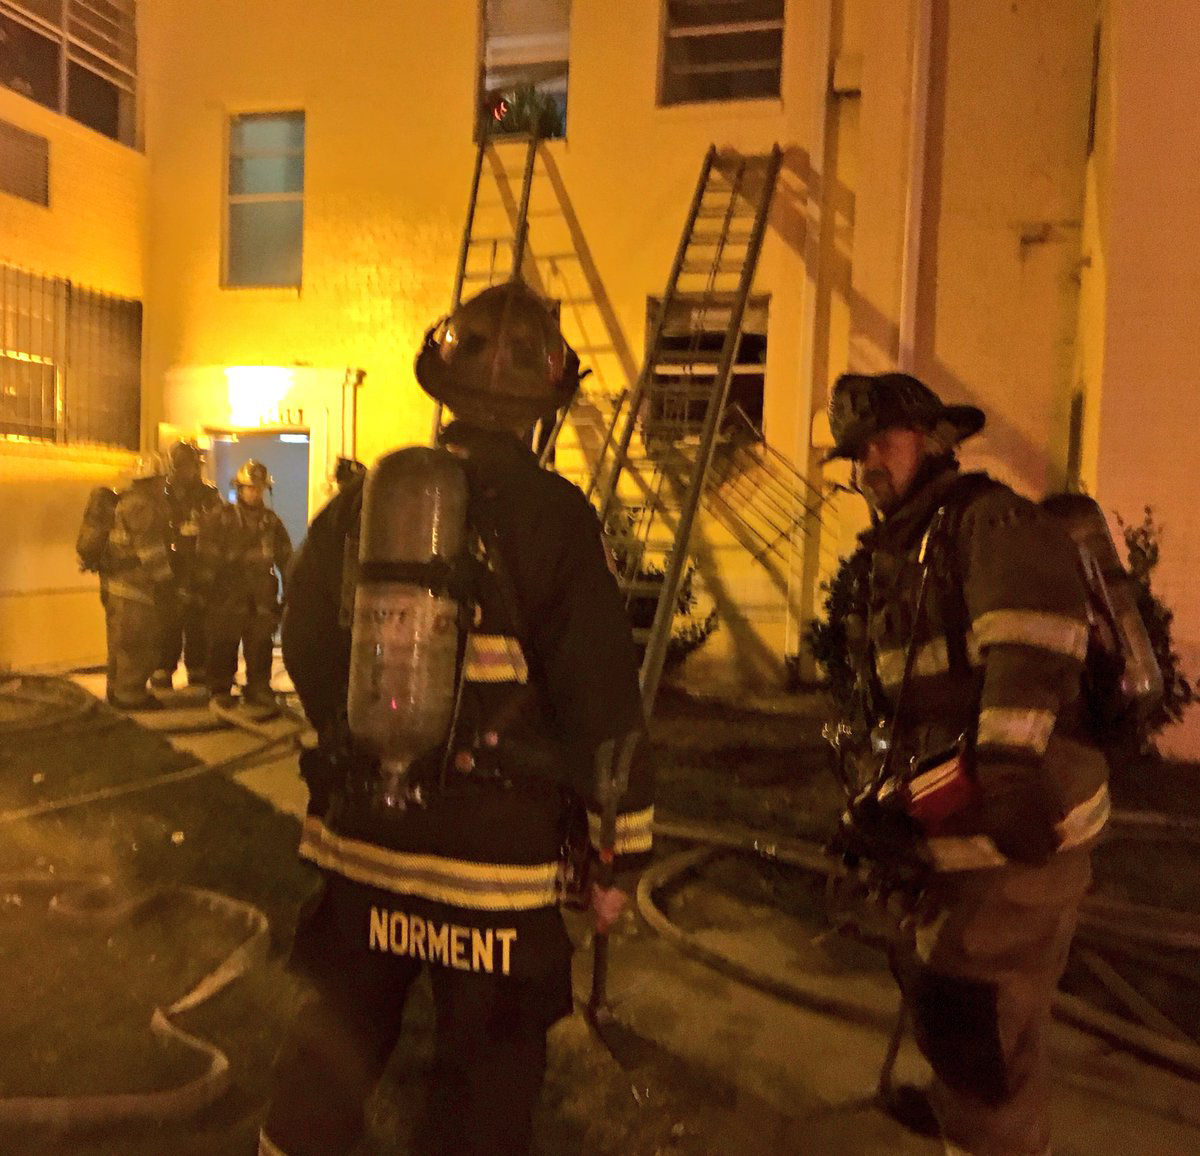 D.C. Fire battling a fire in a first floor apartment on 1400 block of Downing Street NE. One woman was rescued from the fire. (Courtesy D.C. Fire and EMS)